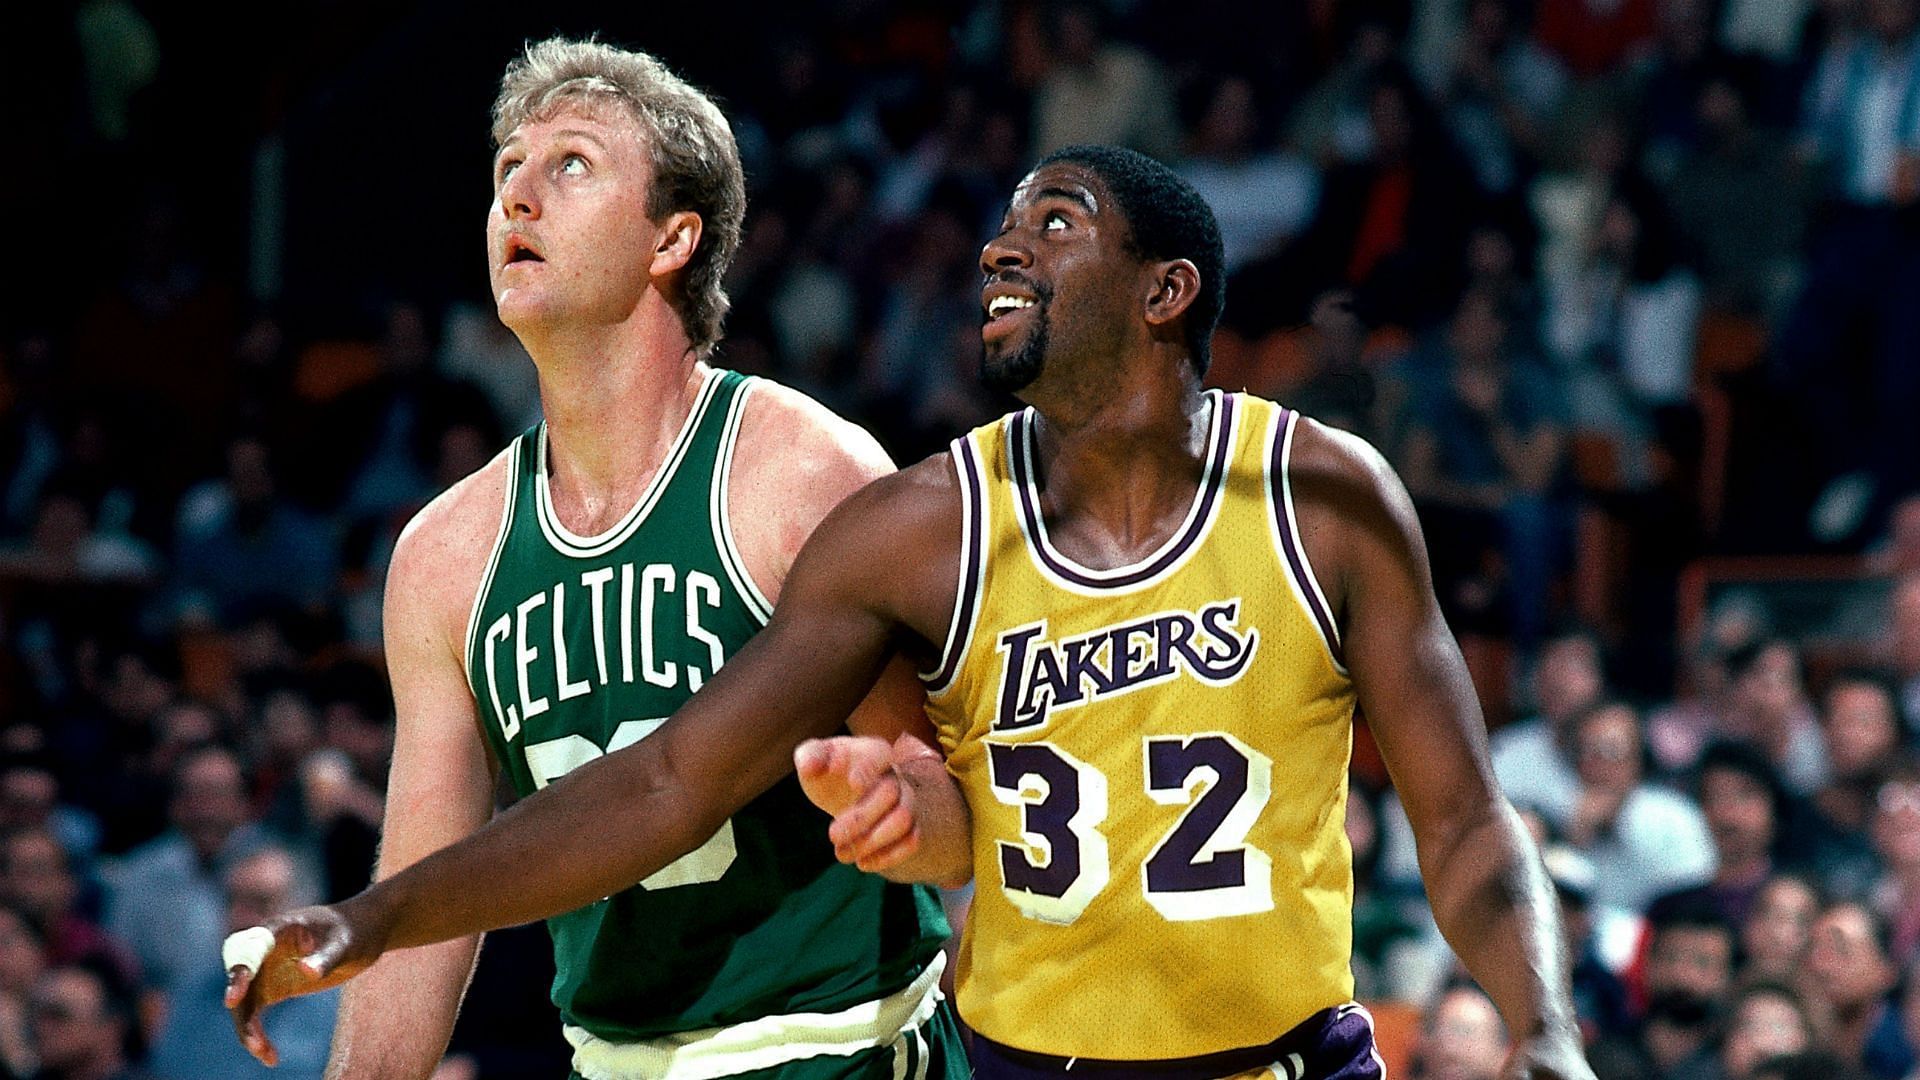 The Converse commercial that Magic Johnson and Larry Bird shot in 1985 was the beginning of a lifelong friendship. [Photo: Sporting News]